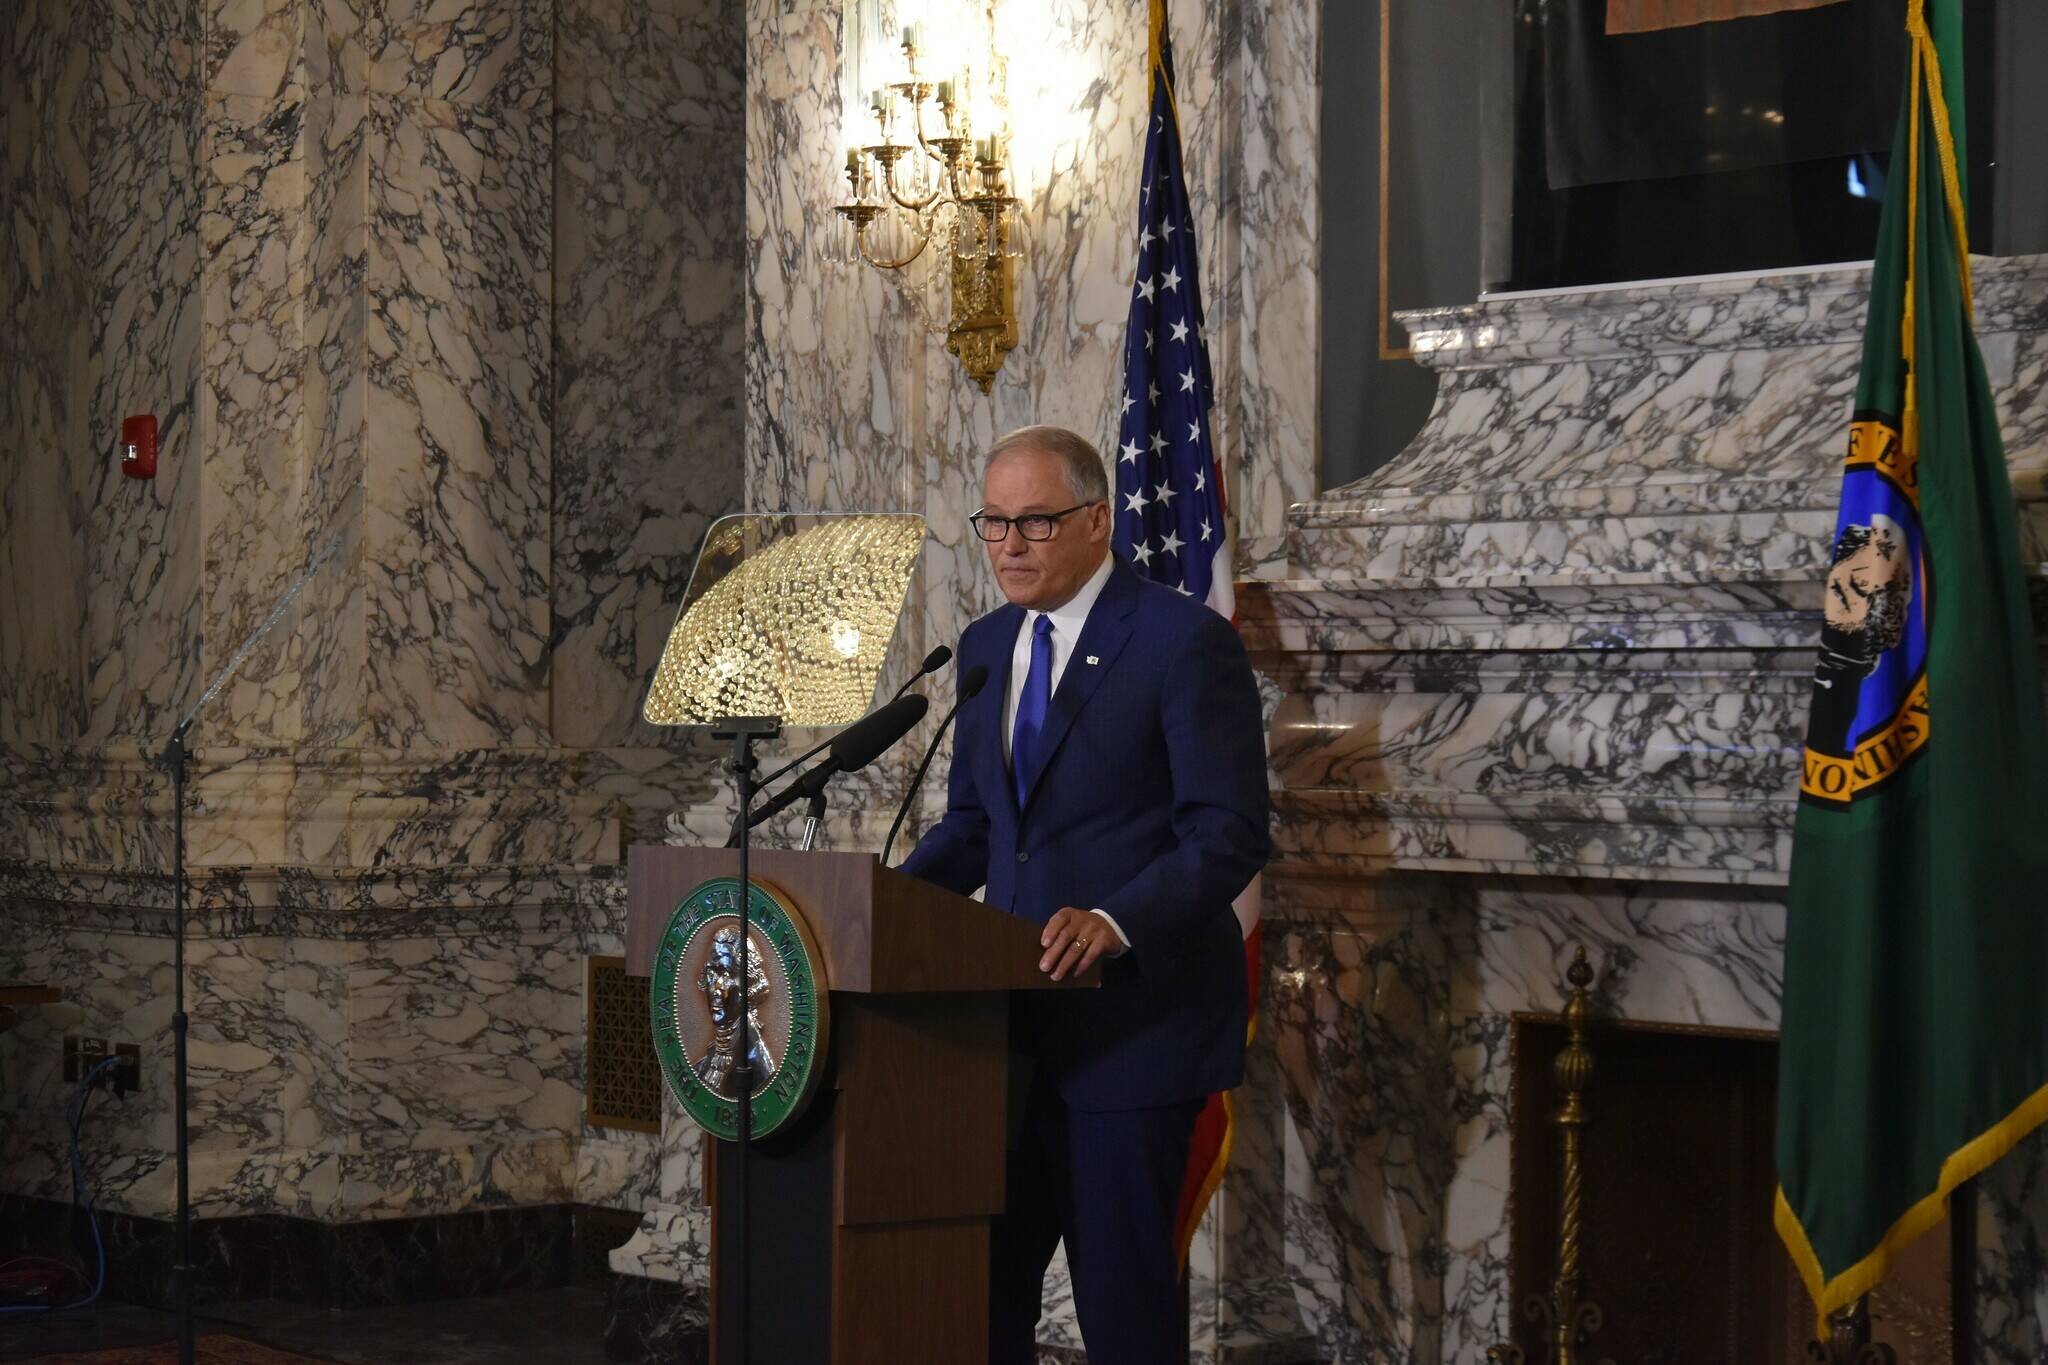 Gov. Jay Inslee during his State of the State address at the Washington state Capitol in Olympia on Tuesday, Jan. 11, 2022. Photo courtesy of Washington Governor’s Office.